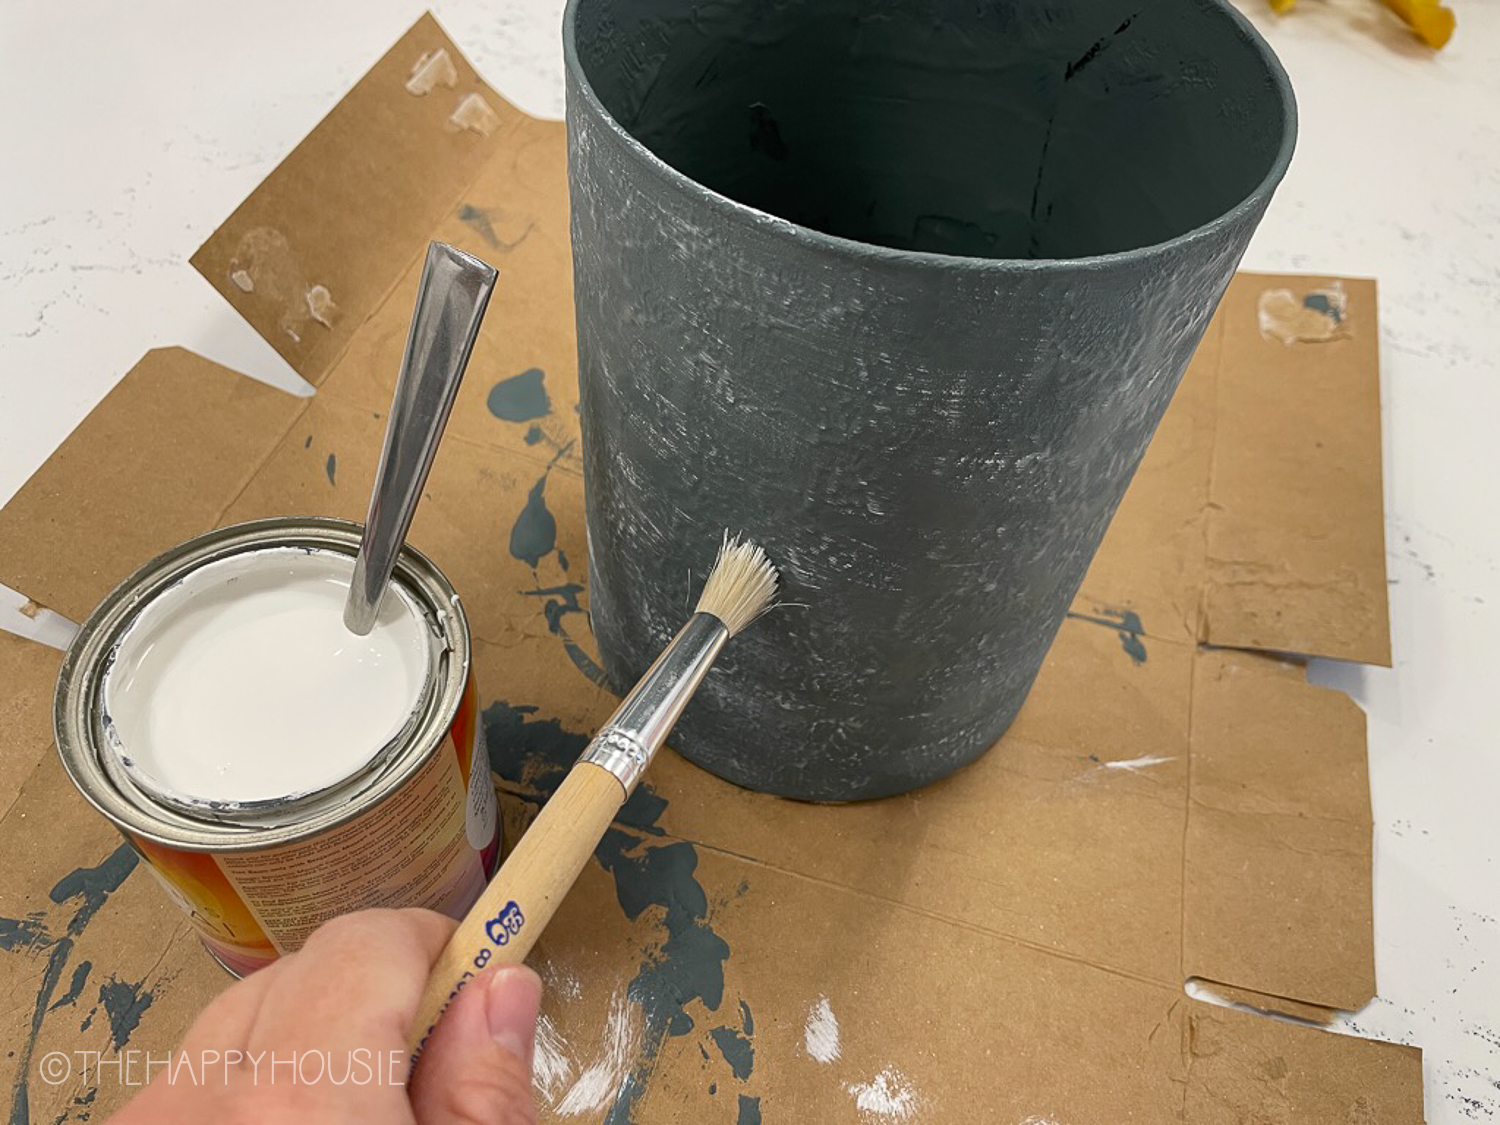 Applying a bit of white paint to the vase.